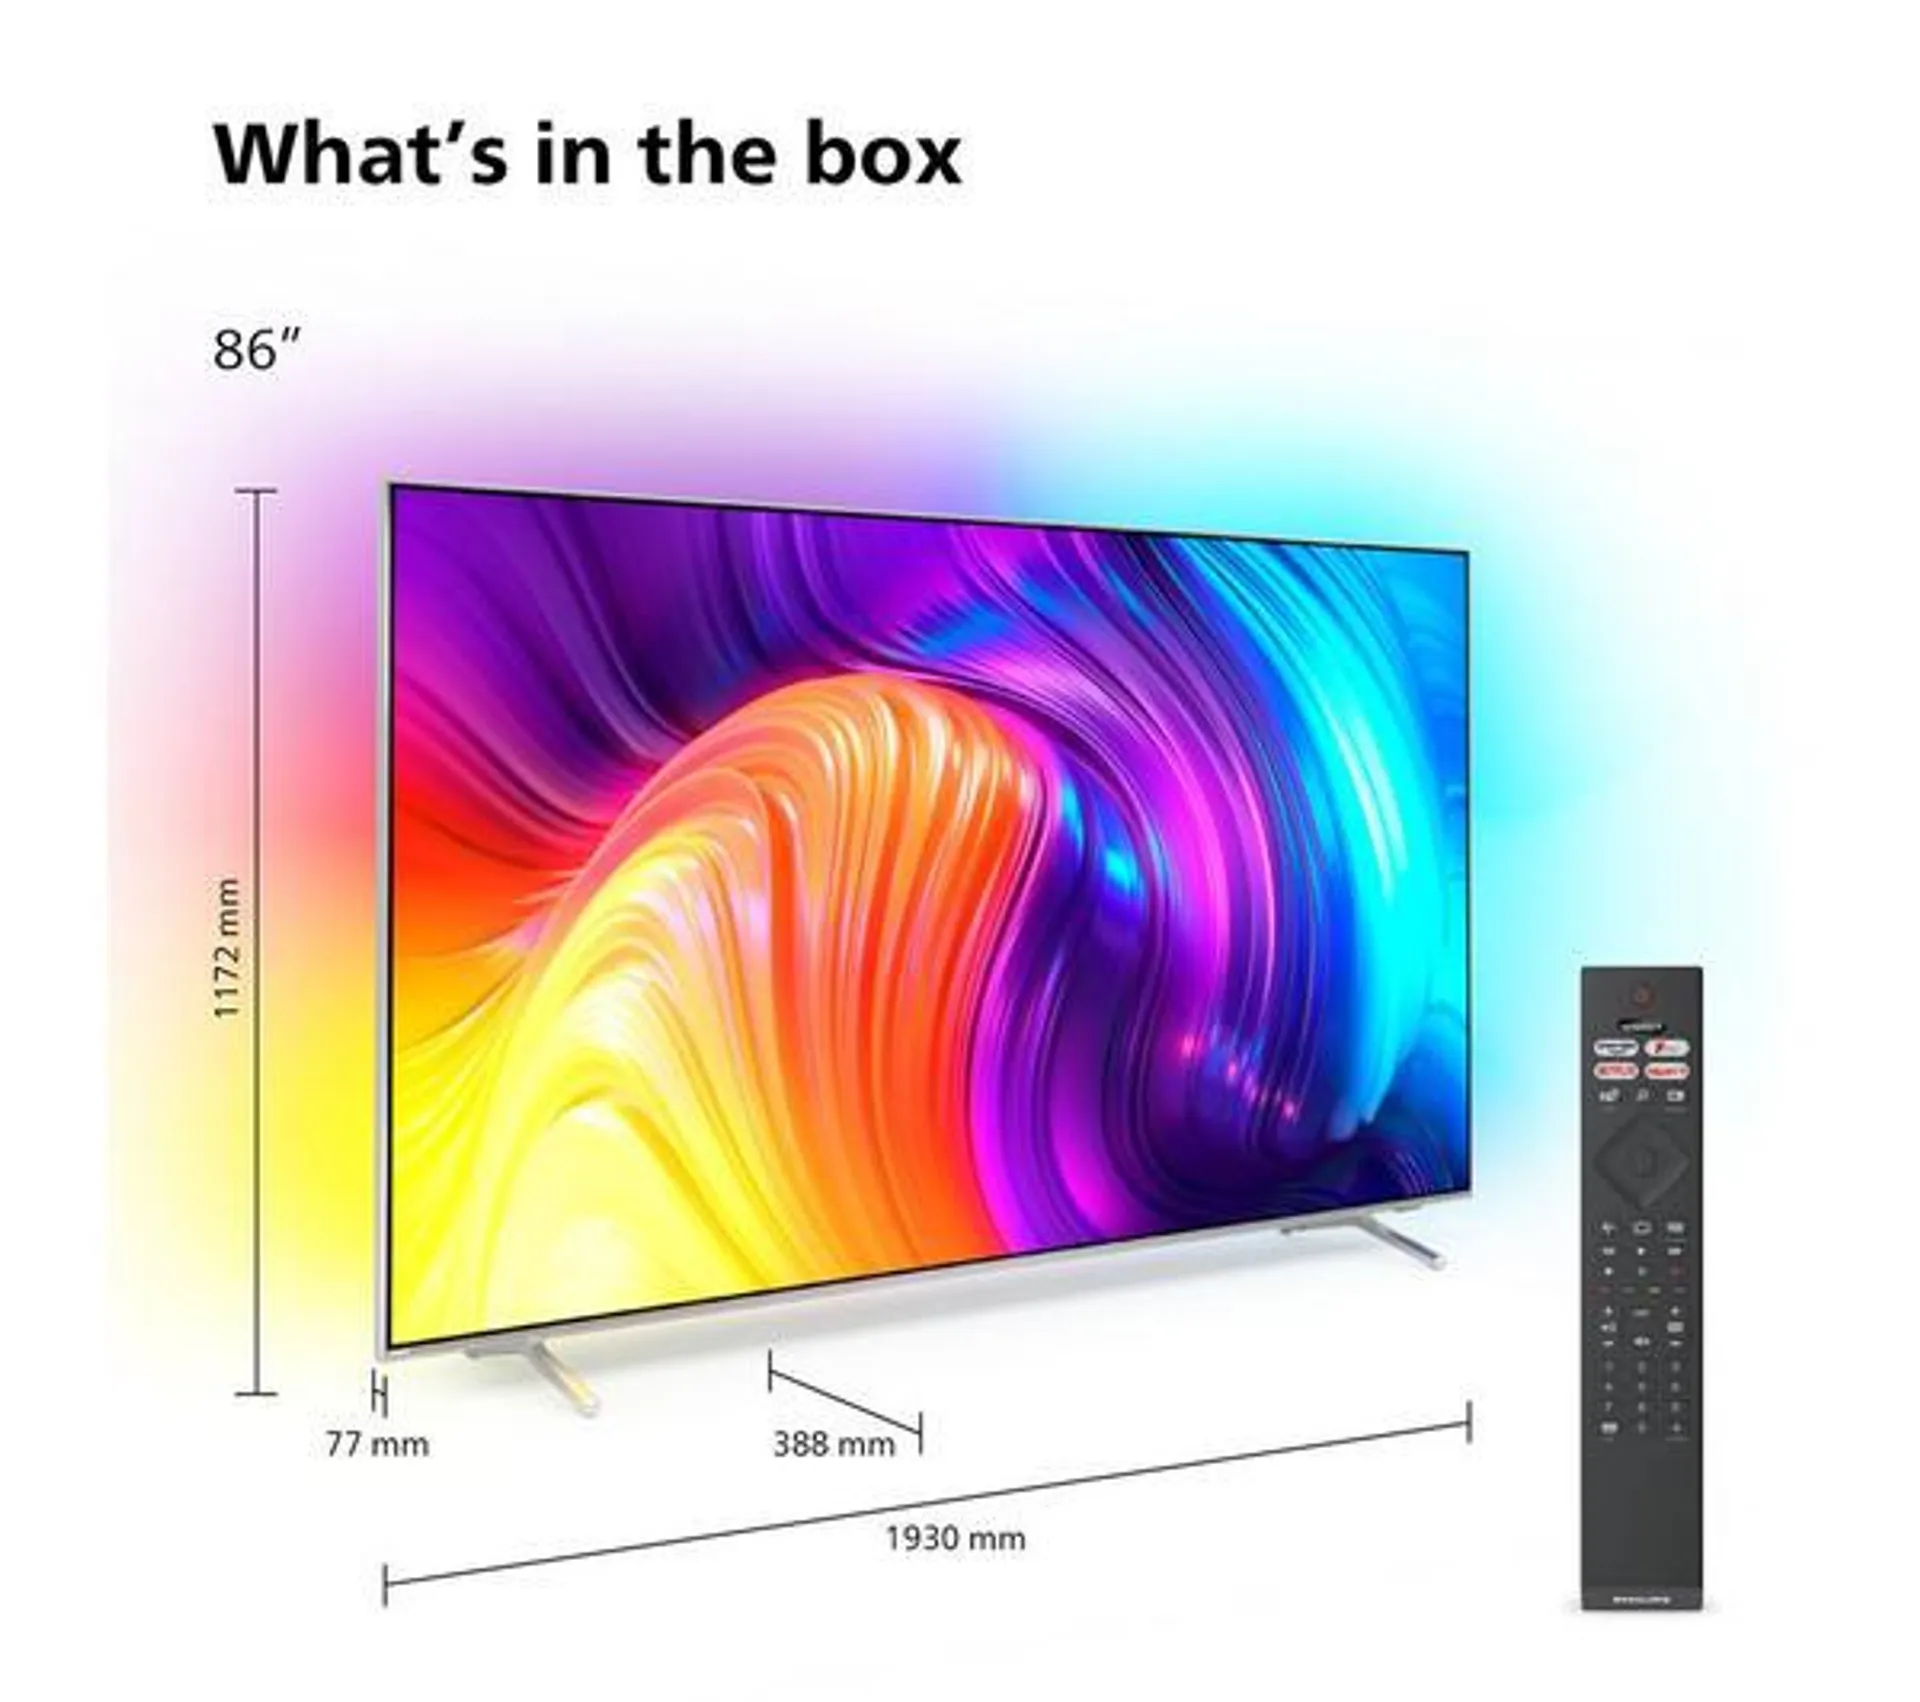 PHILIPS 75PUS8807/12 75" Smart 4K Ultra HD HDR LED TV with Google Assistant